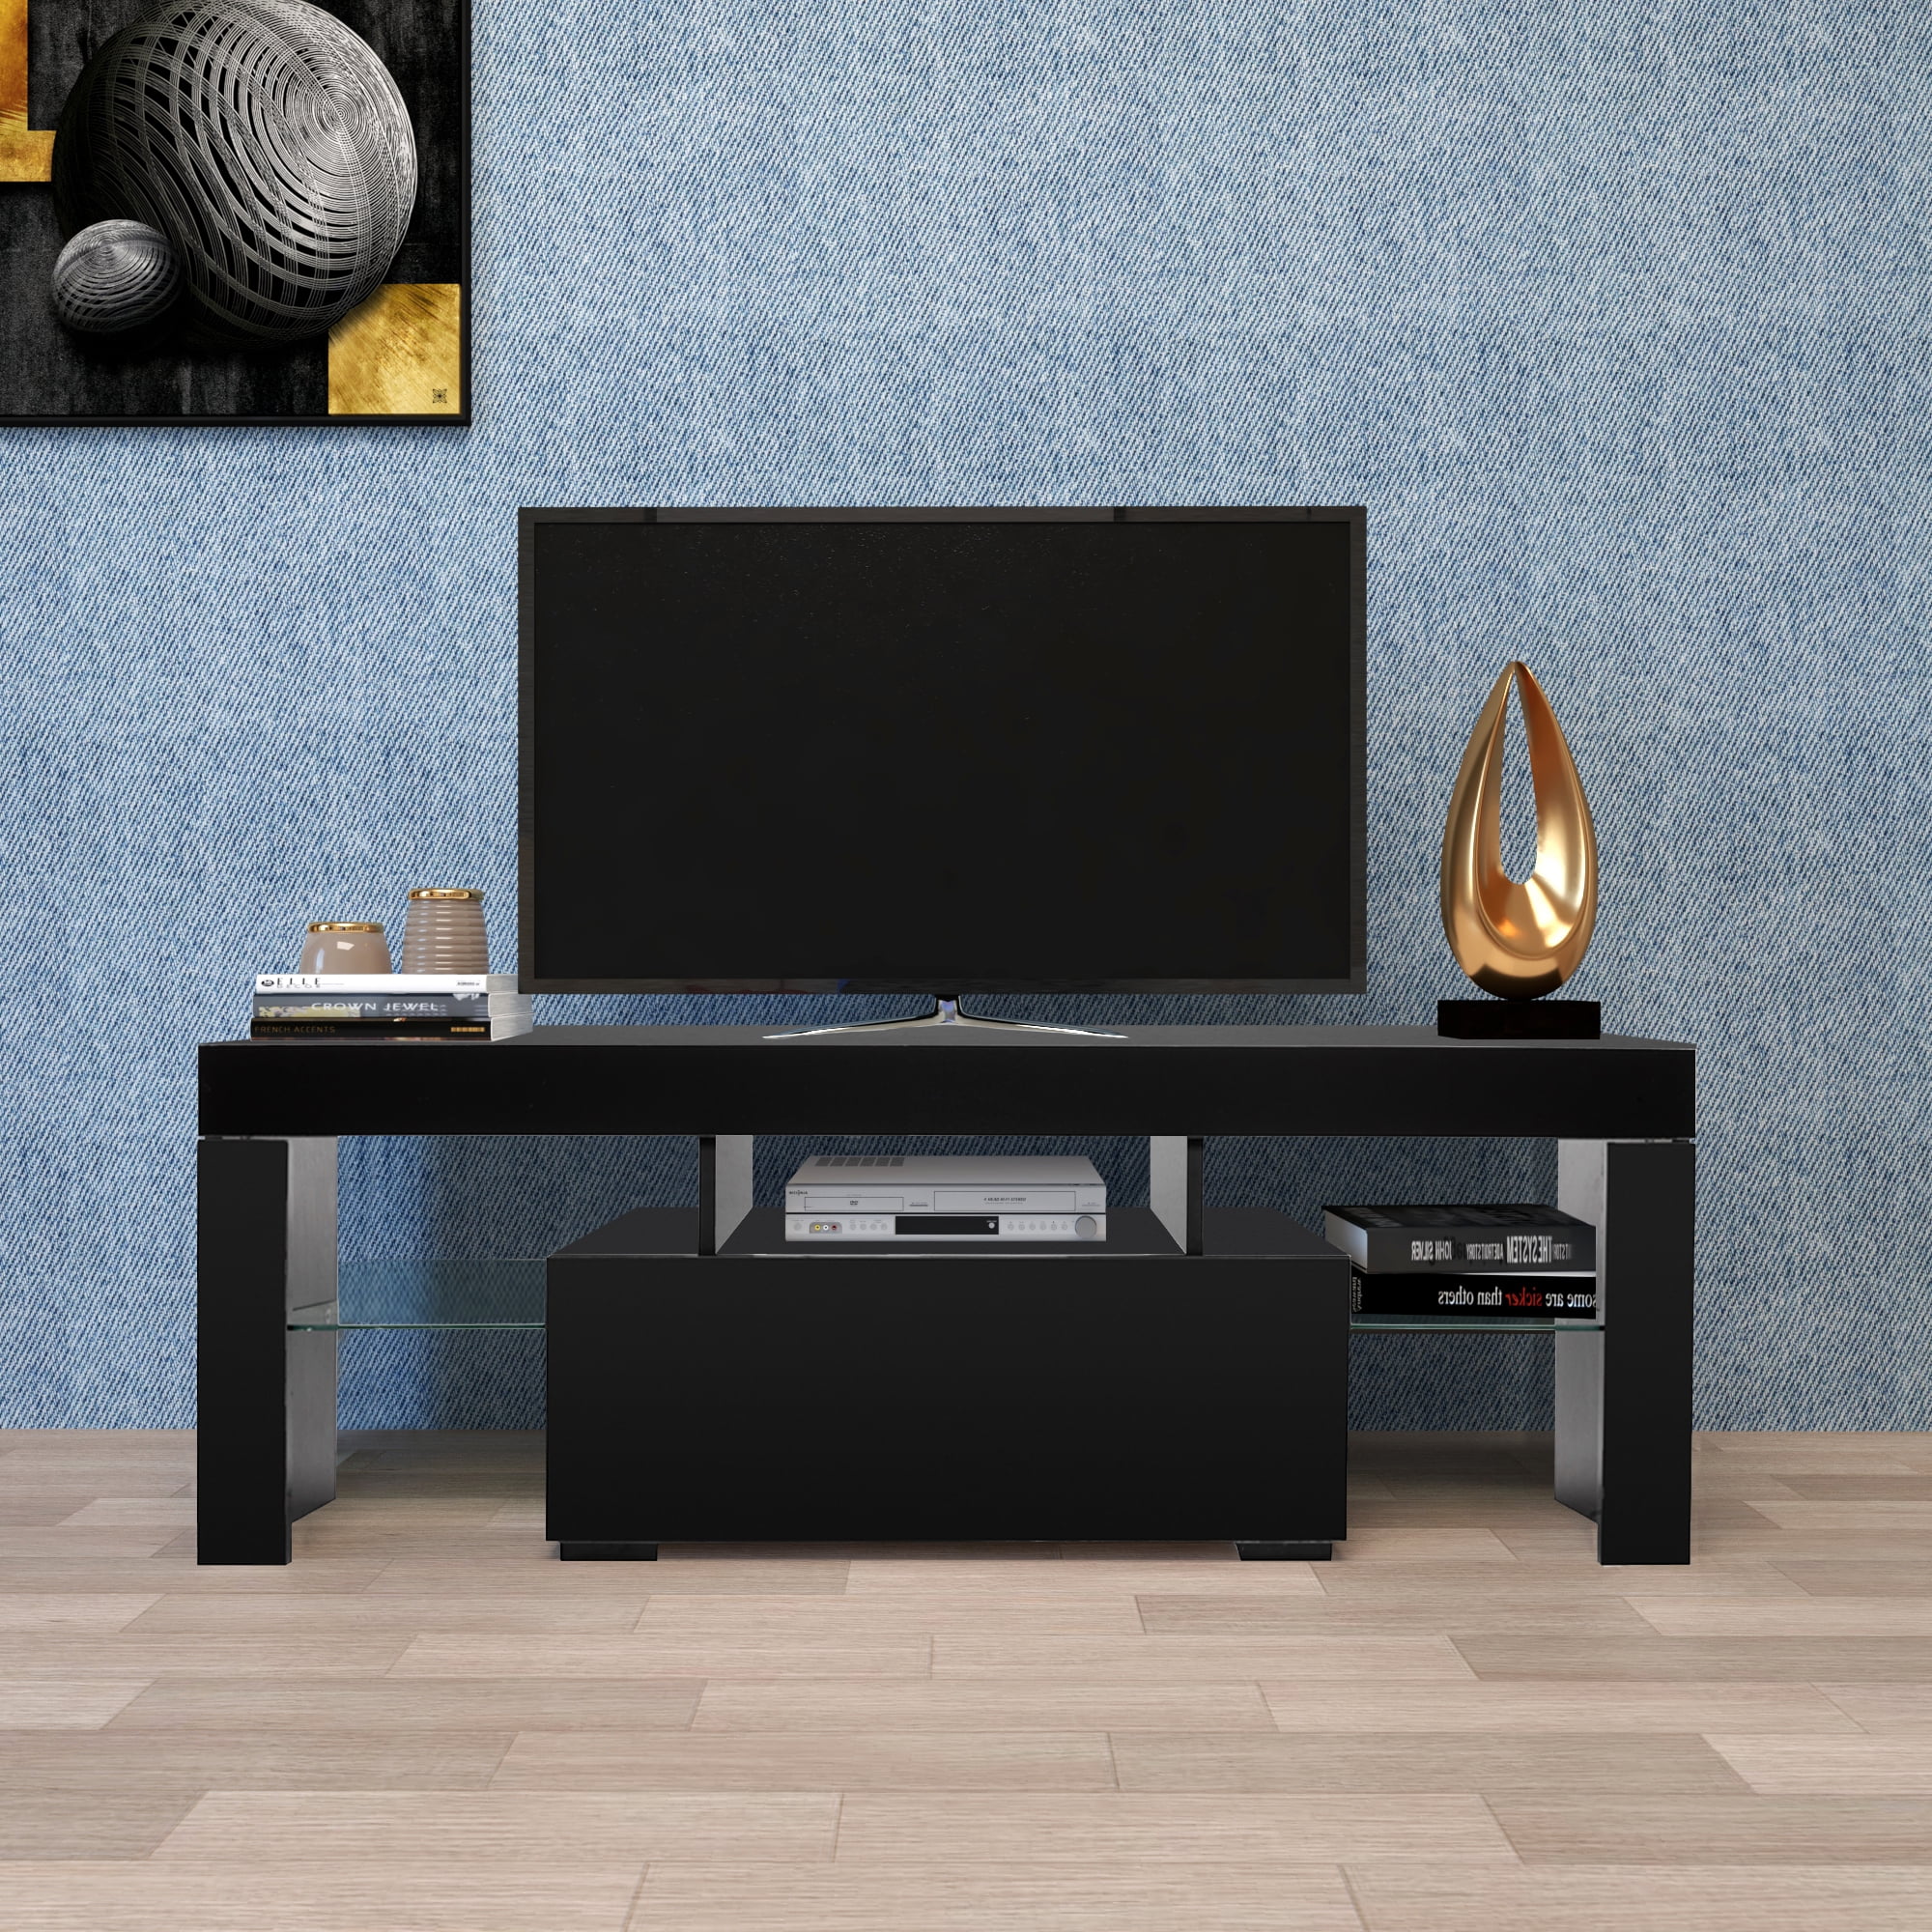 Entertainment Centers and TV Stands  YOFE TV Stand  with 